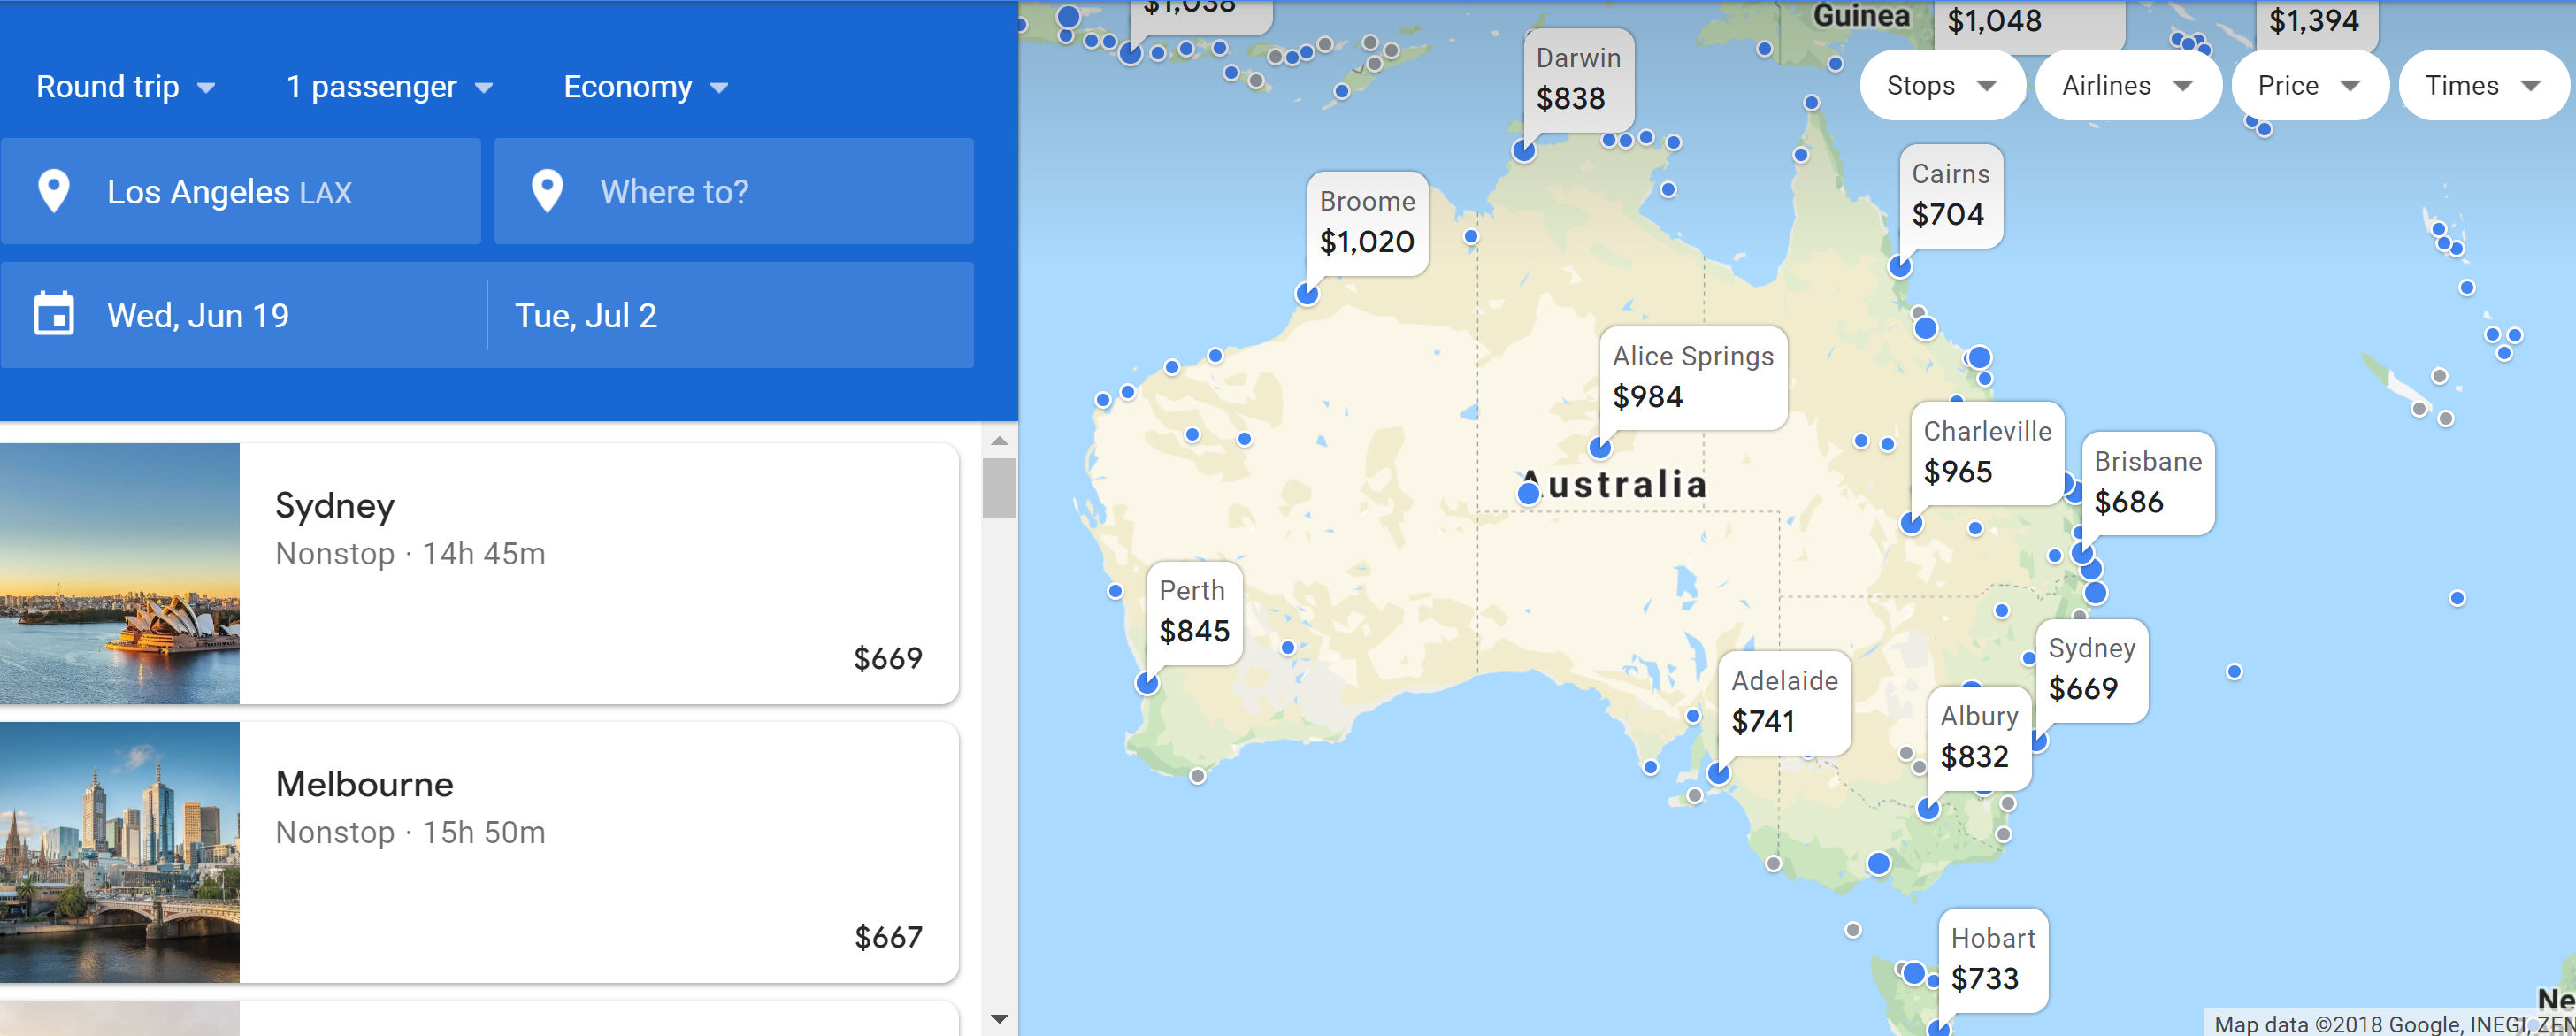 a map of australia with price tags